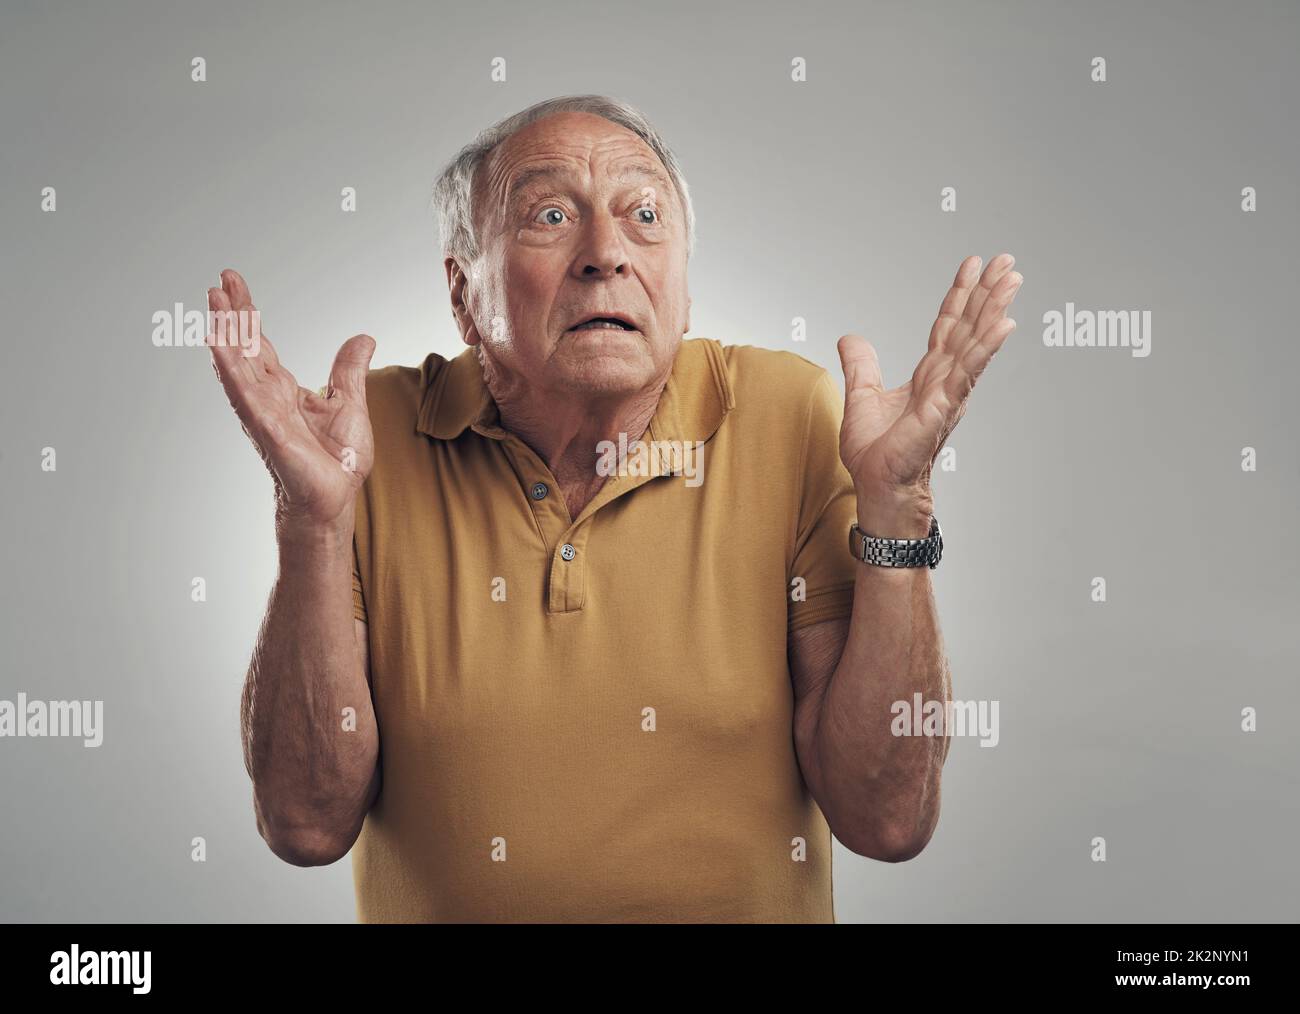 I did not see that coming. Studio of an elderly man in disbelief against a grey background. Stock Photo